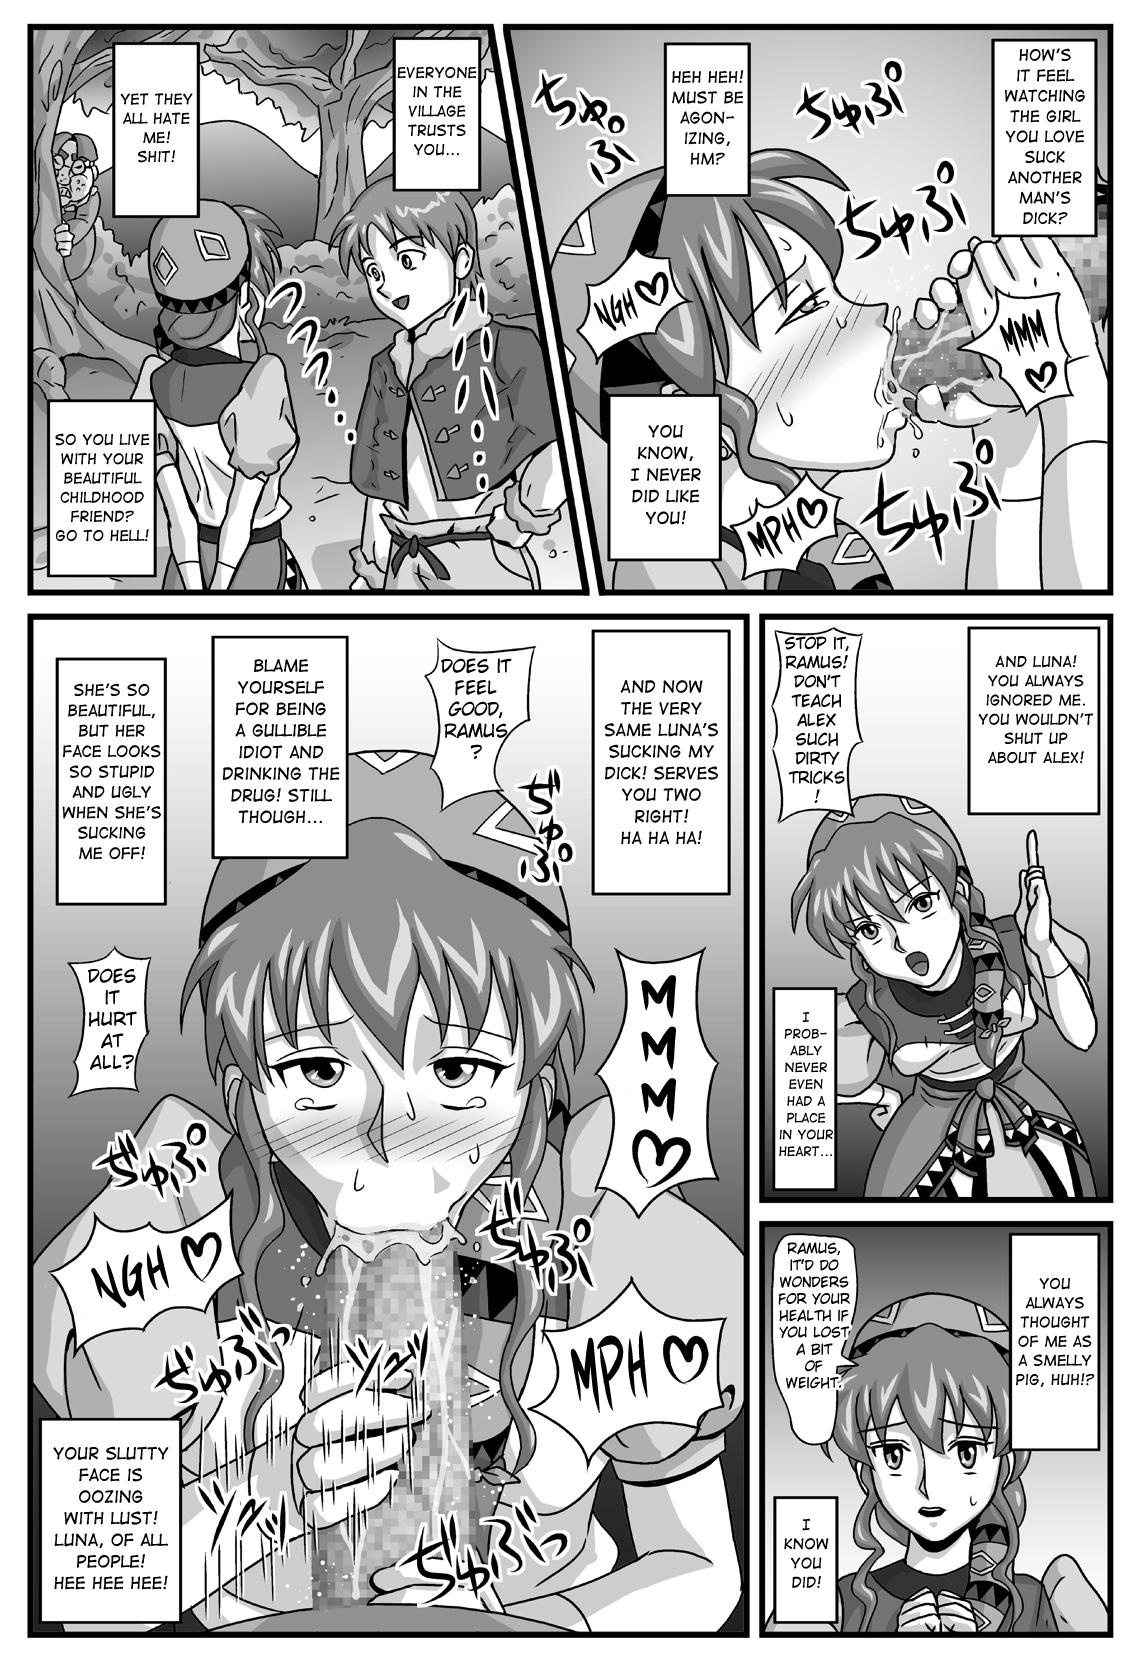 Gay Physicals The Cumdumpster Princess of Burg 01 - Lunar silver star story Bigcocks - Page 9